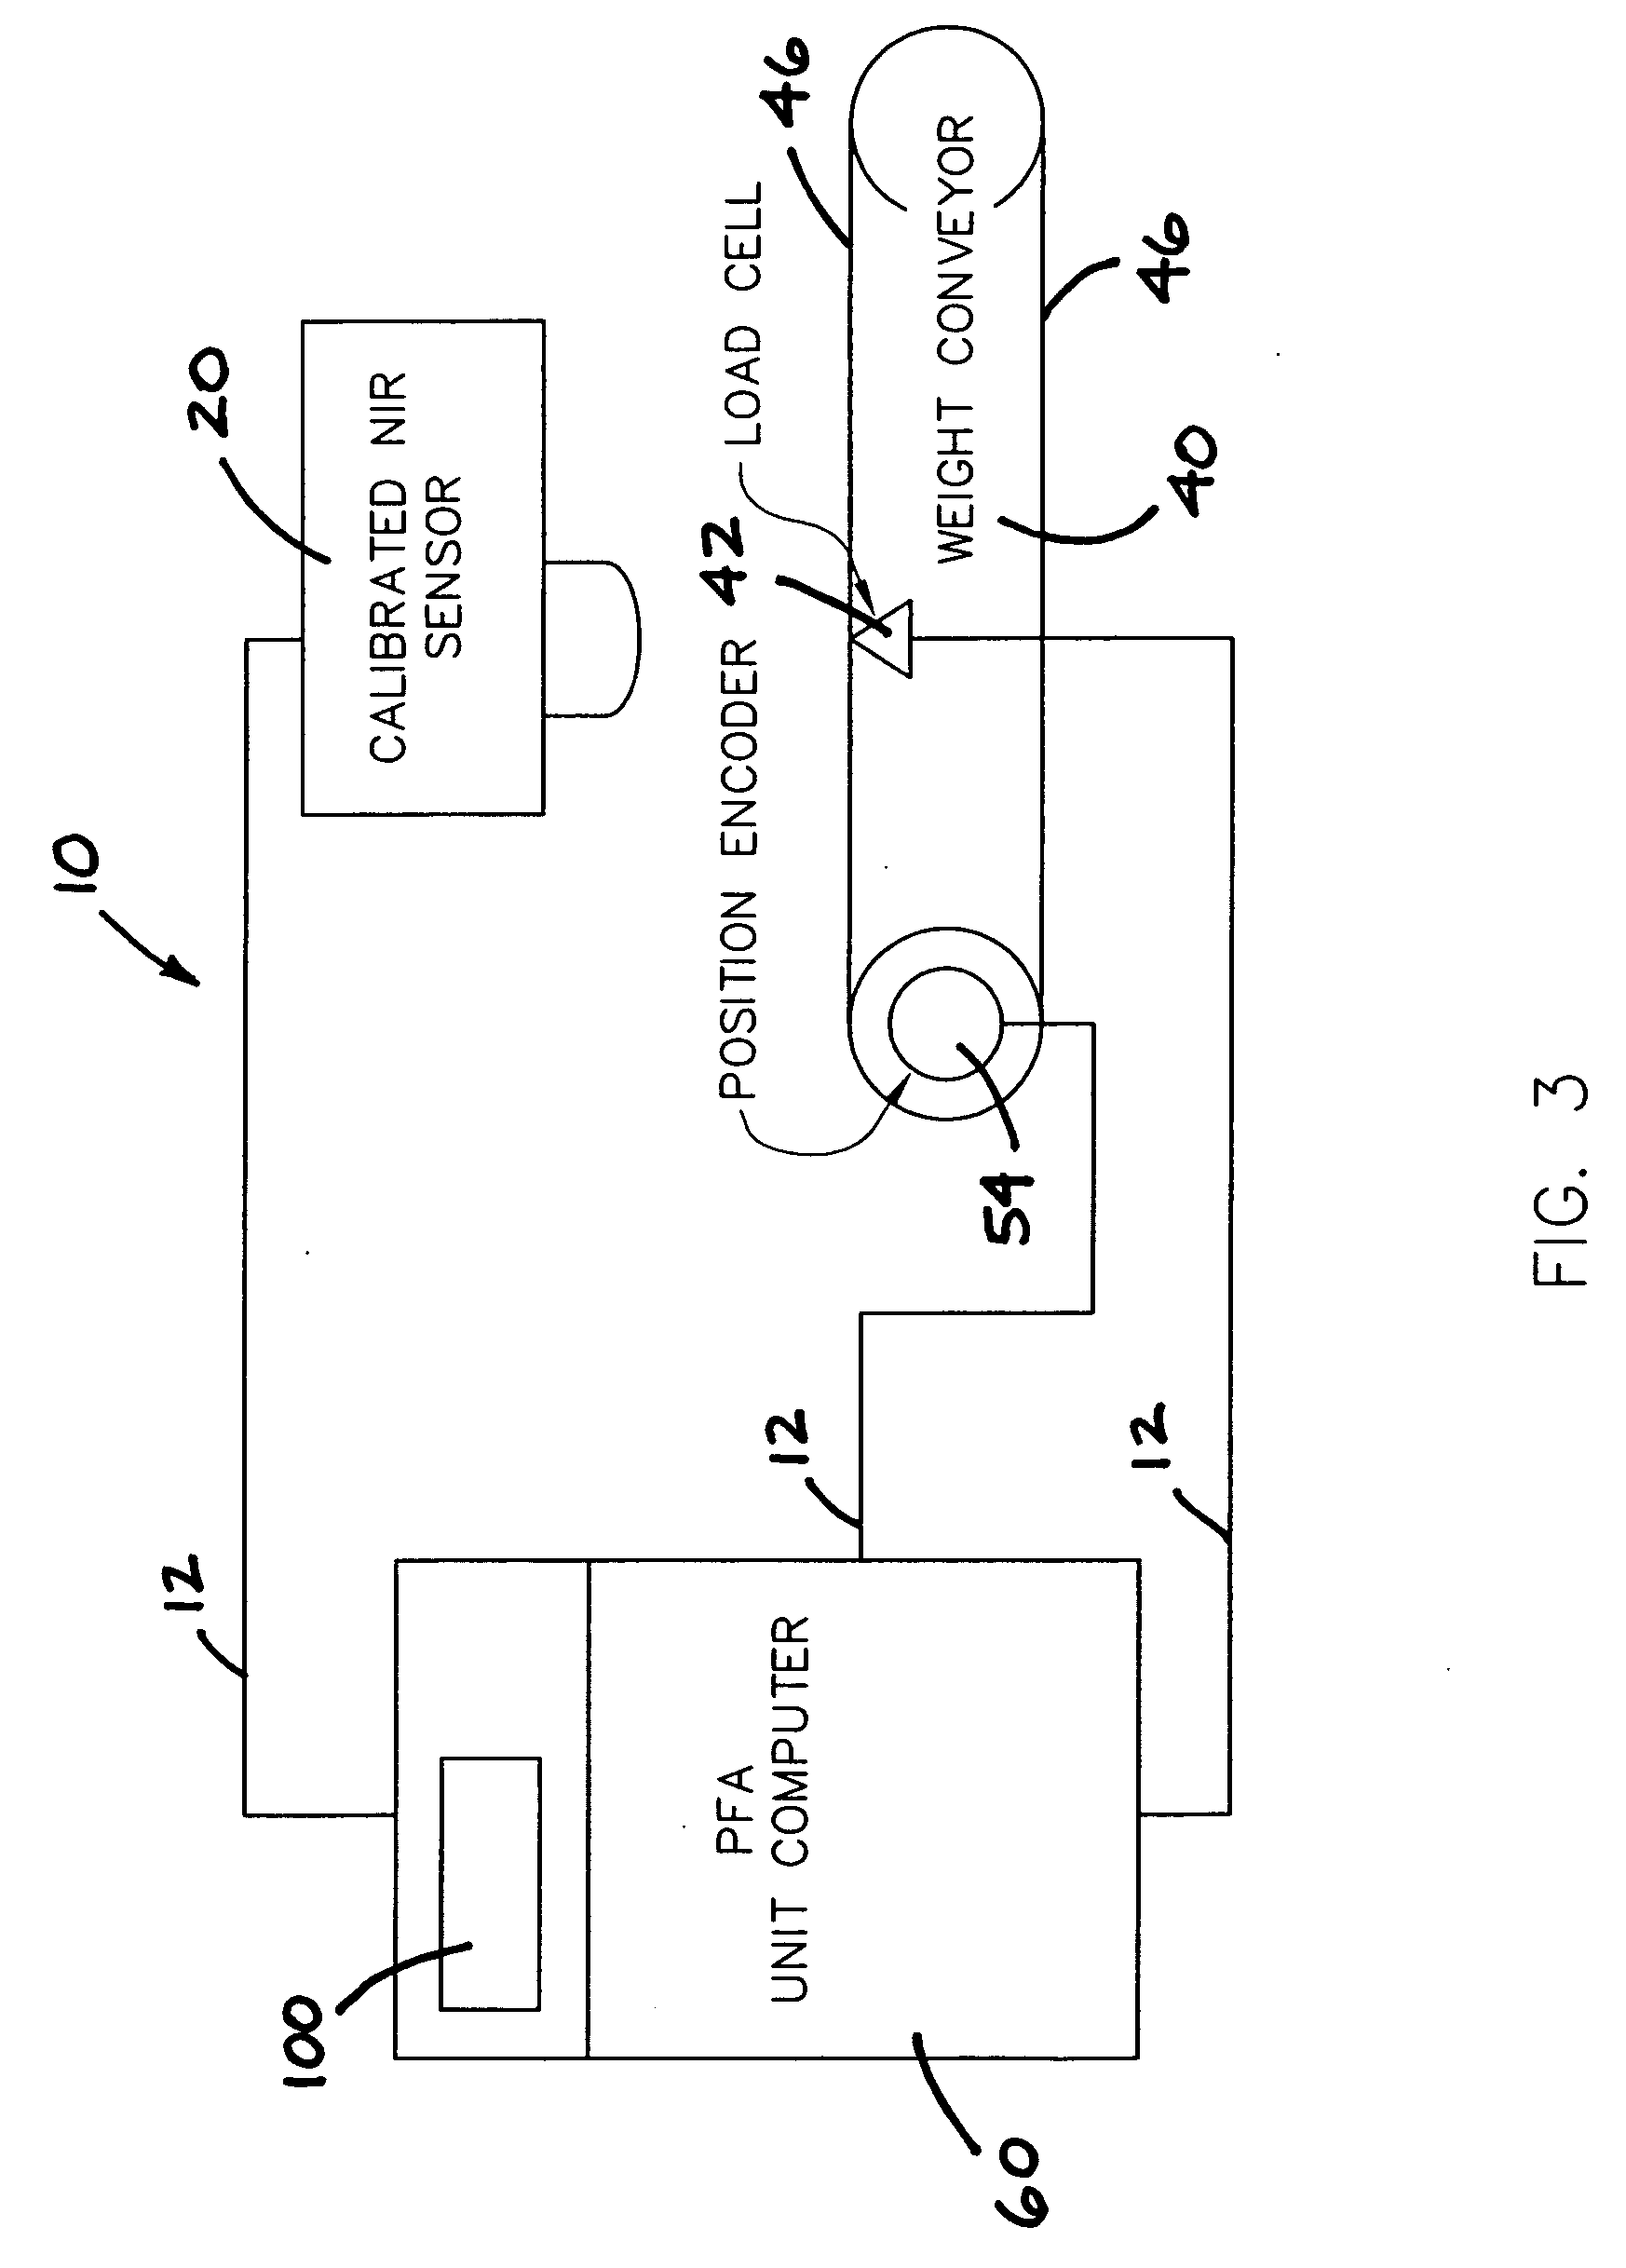 Production meat analysis system and method